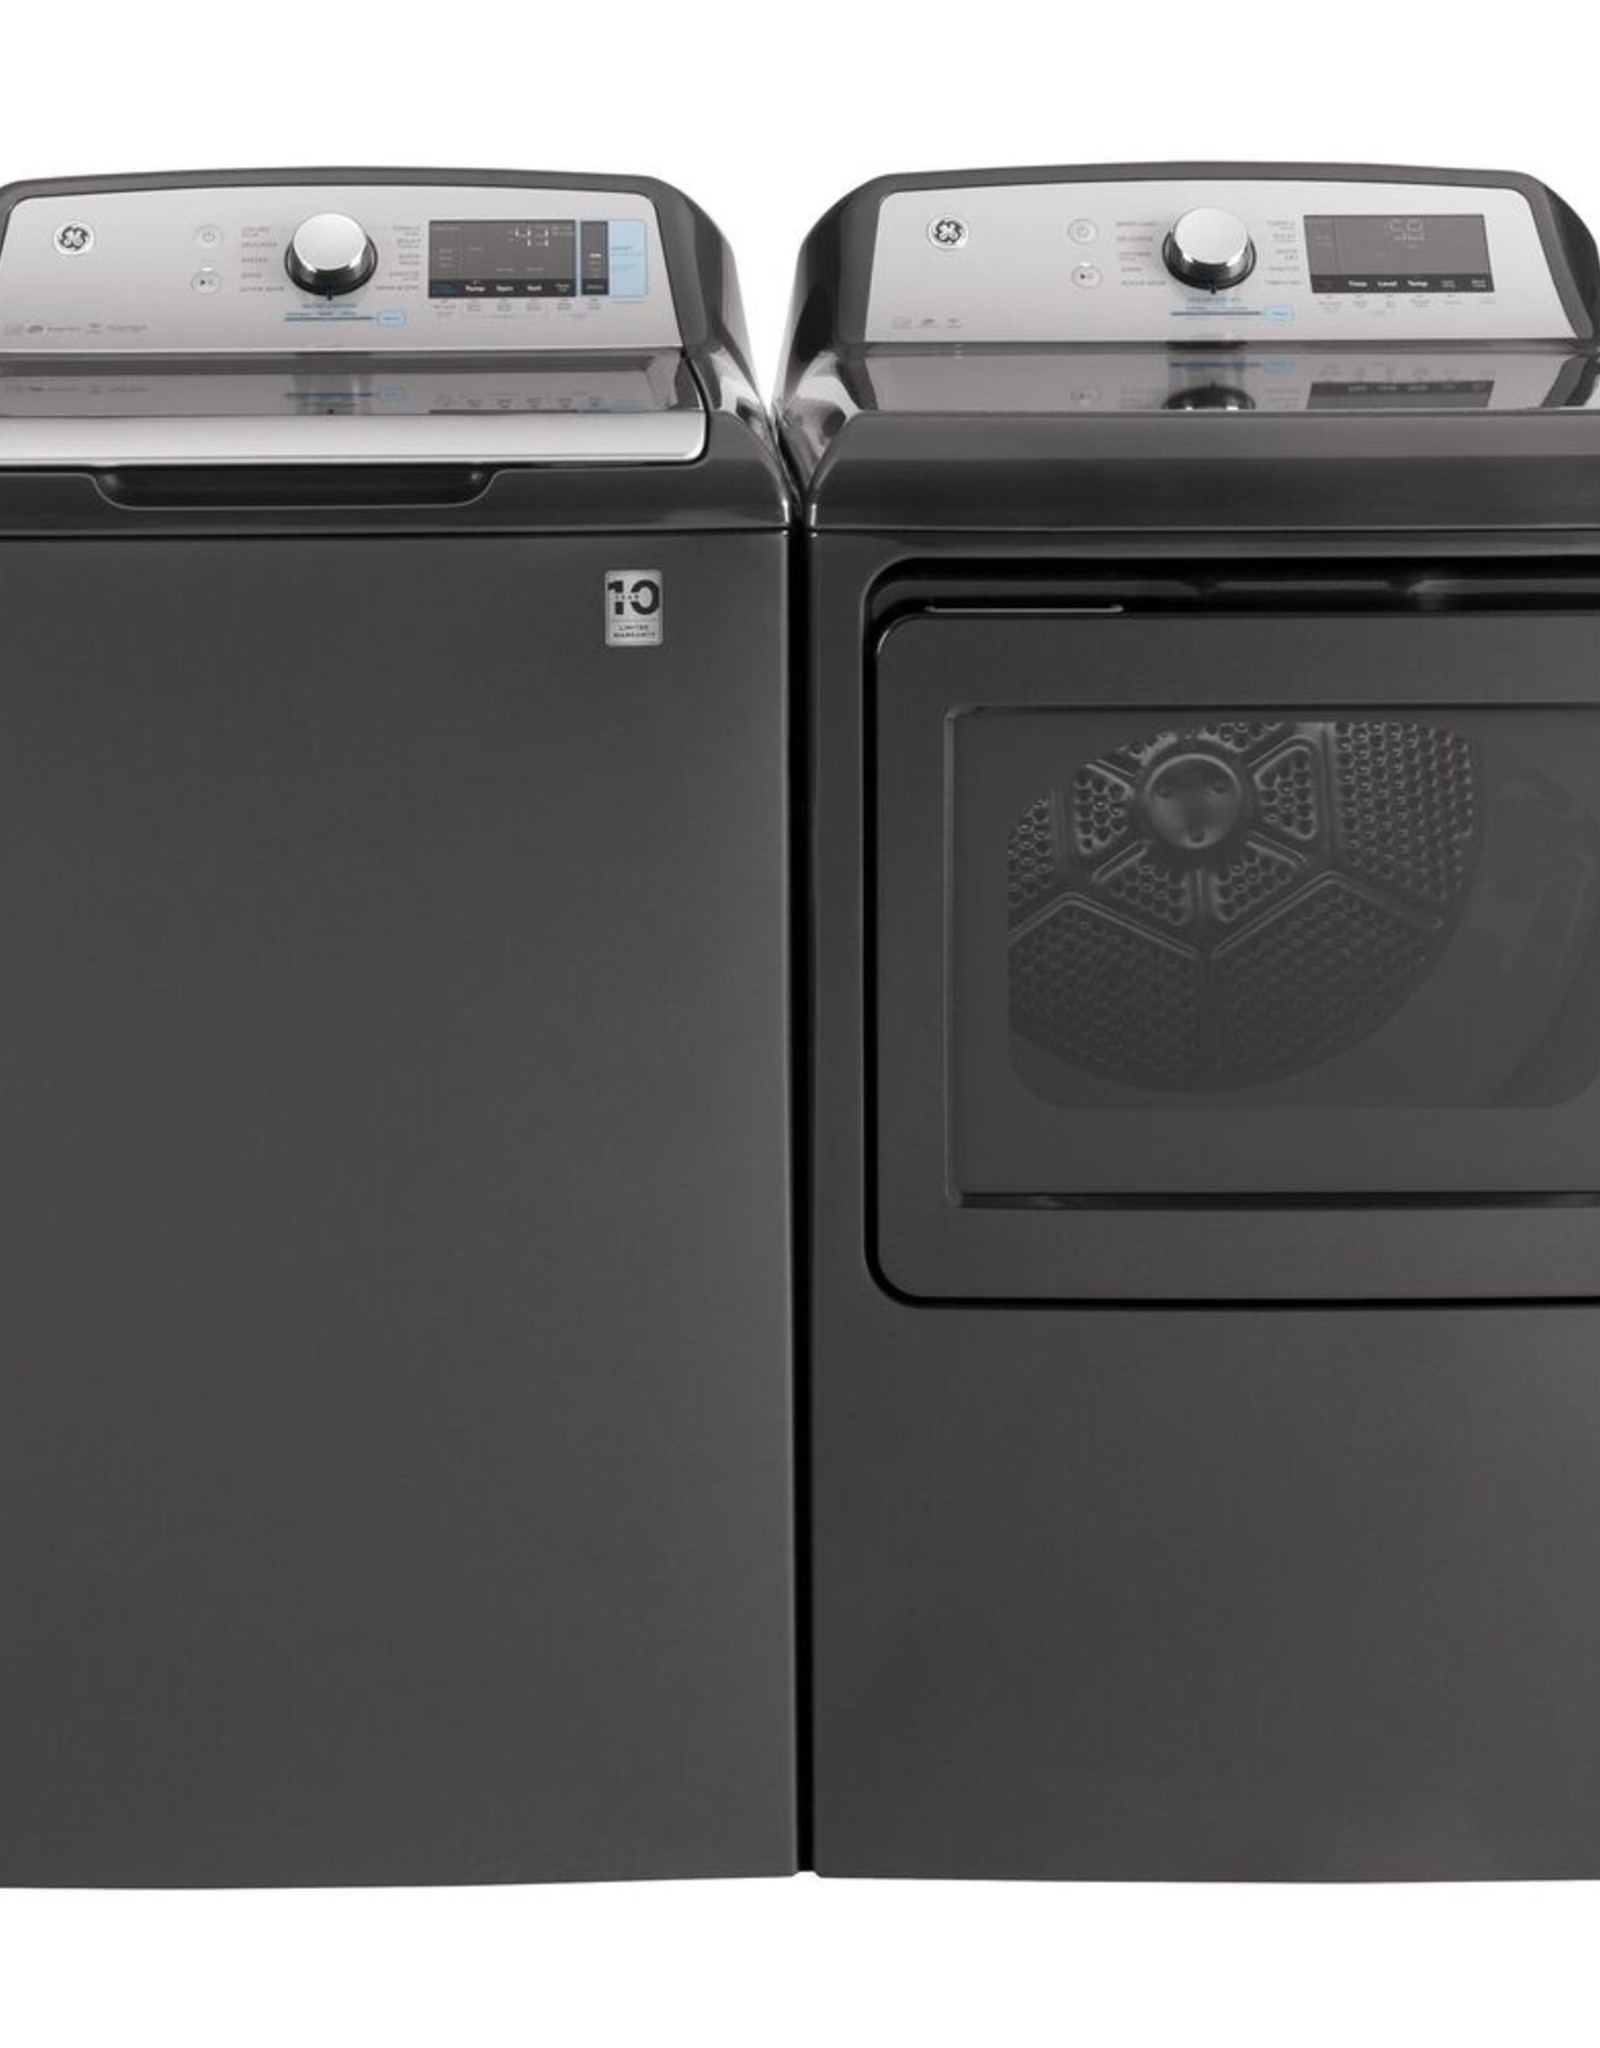 CLS GE Profile 4.9 CU FT Washer : Diamond Gray